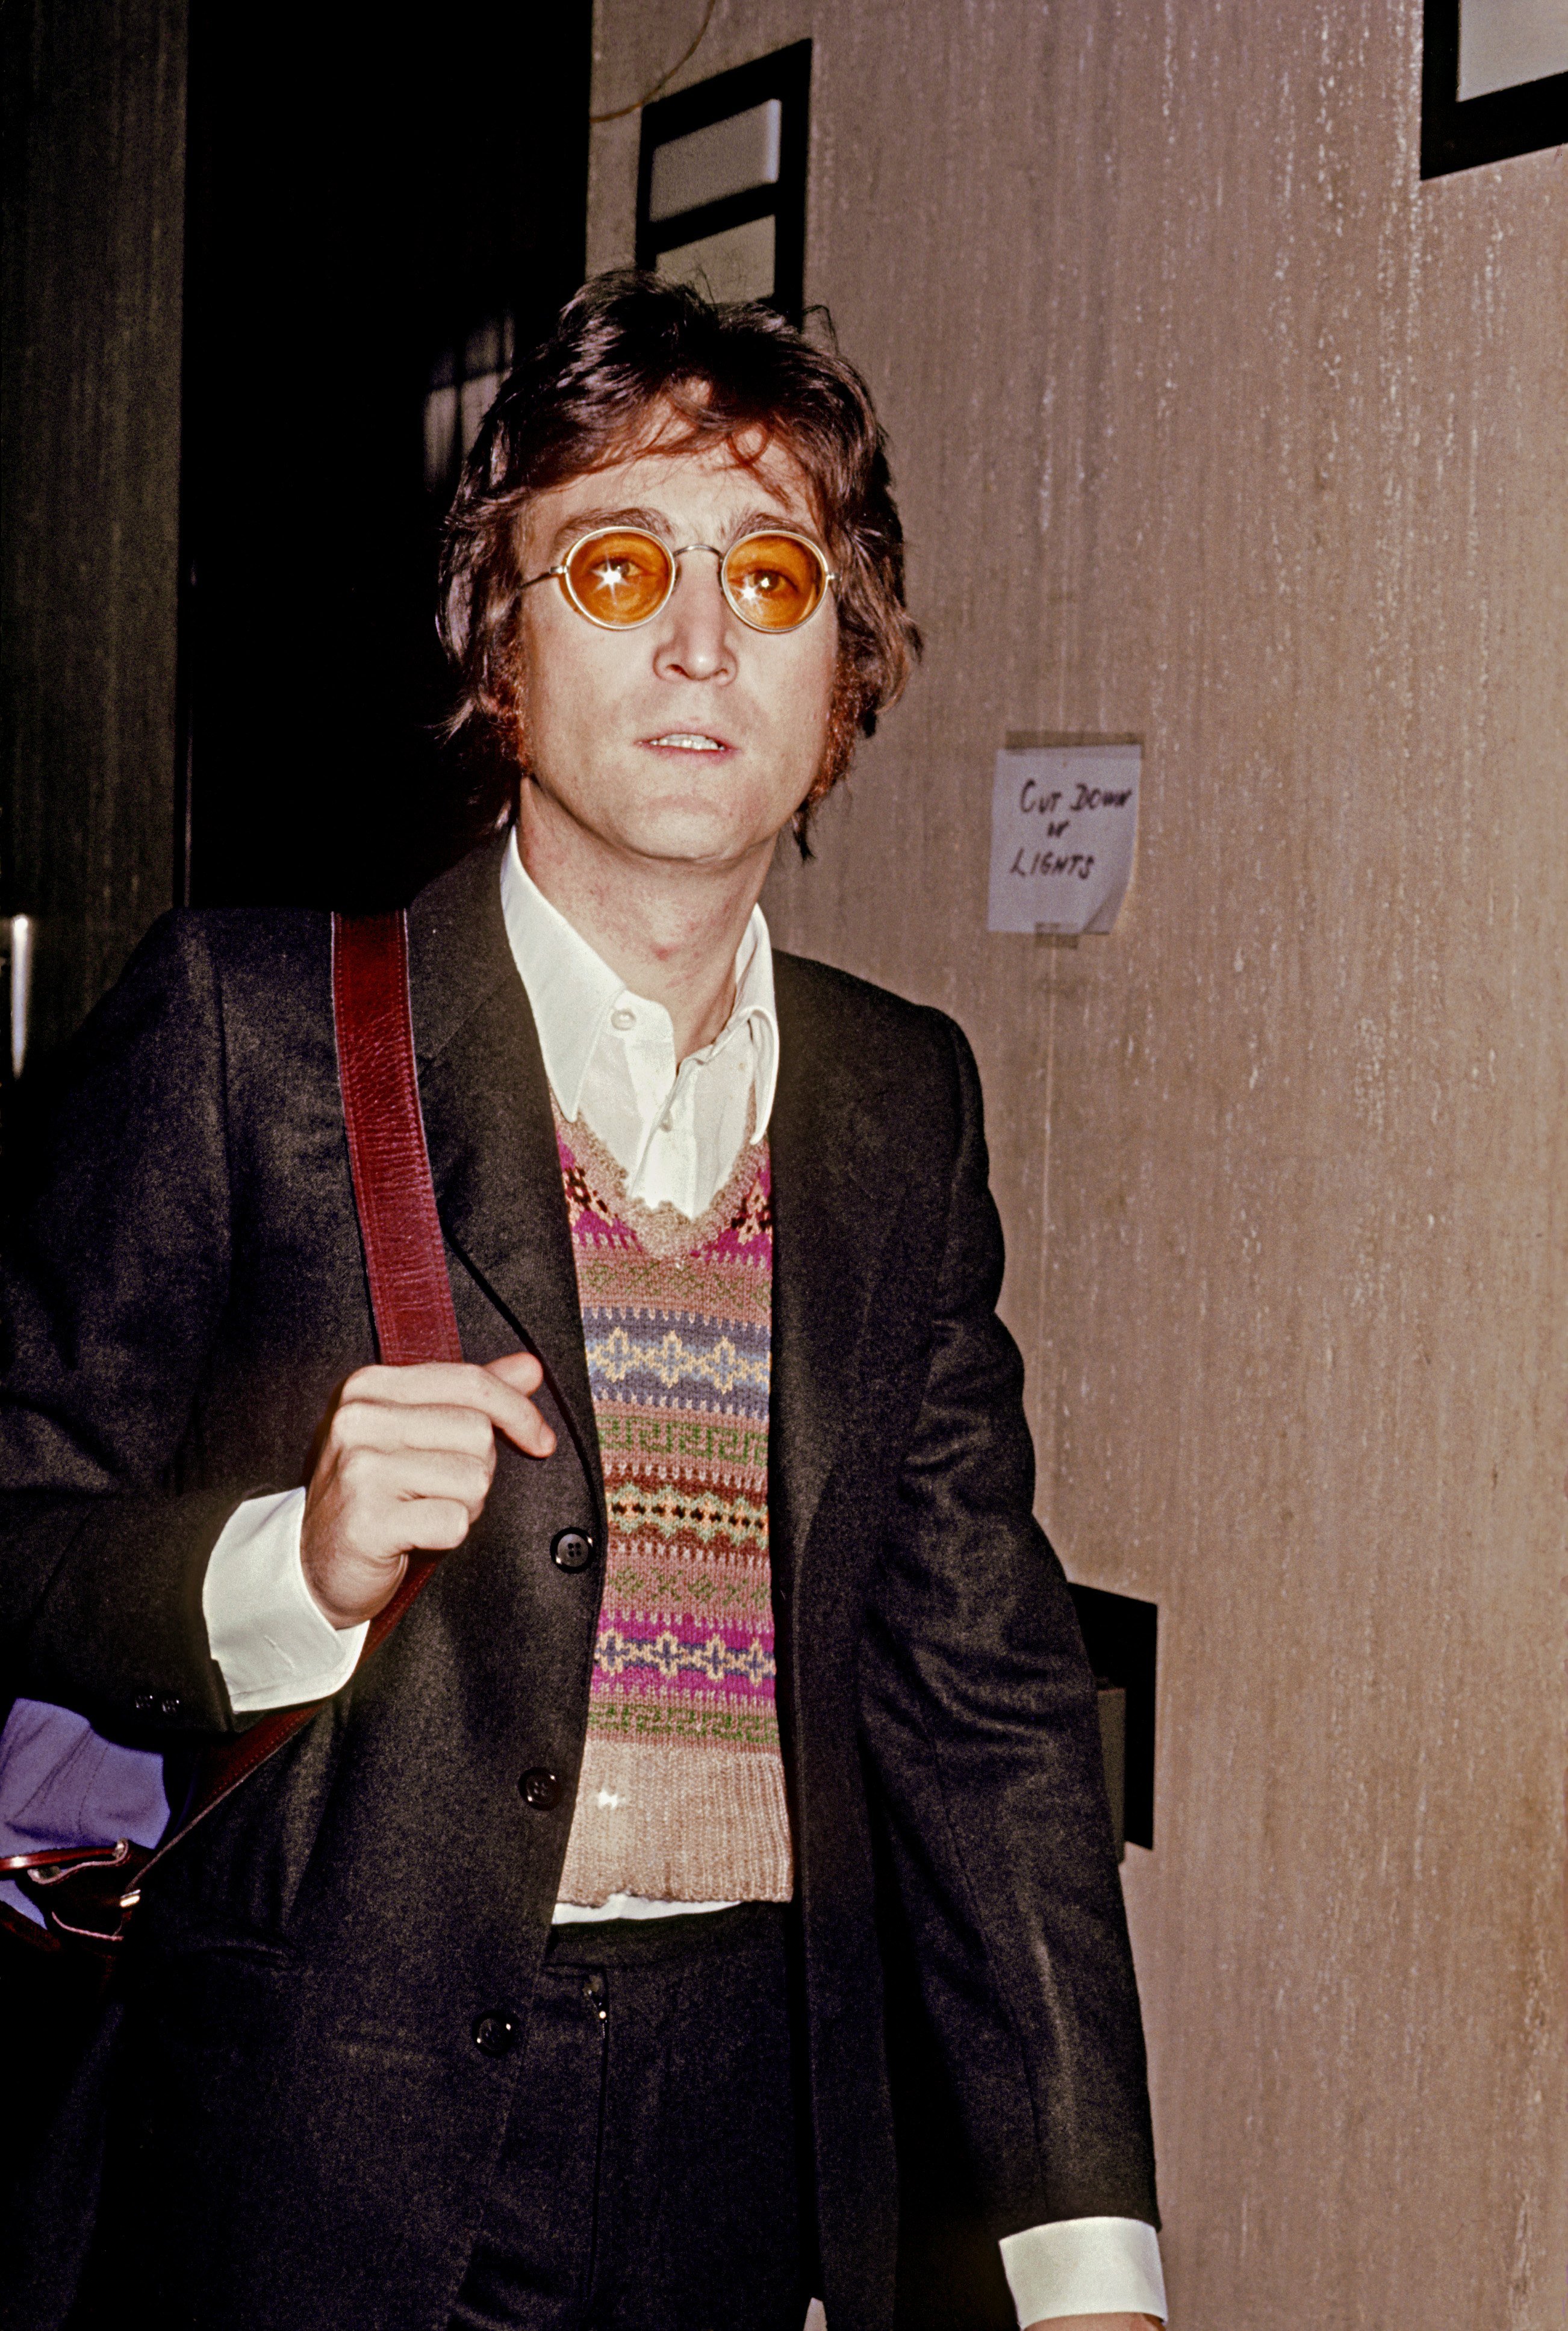 John Lennon poses for a photo circa 1973 in New York City, New York. | Source: Getty Images.